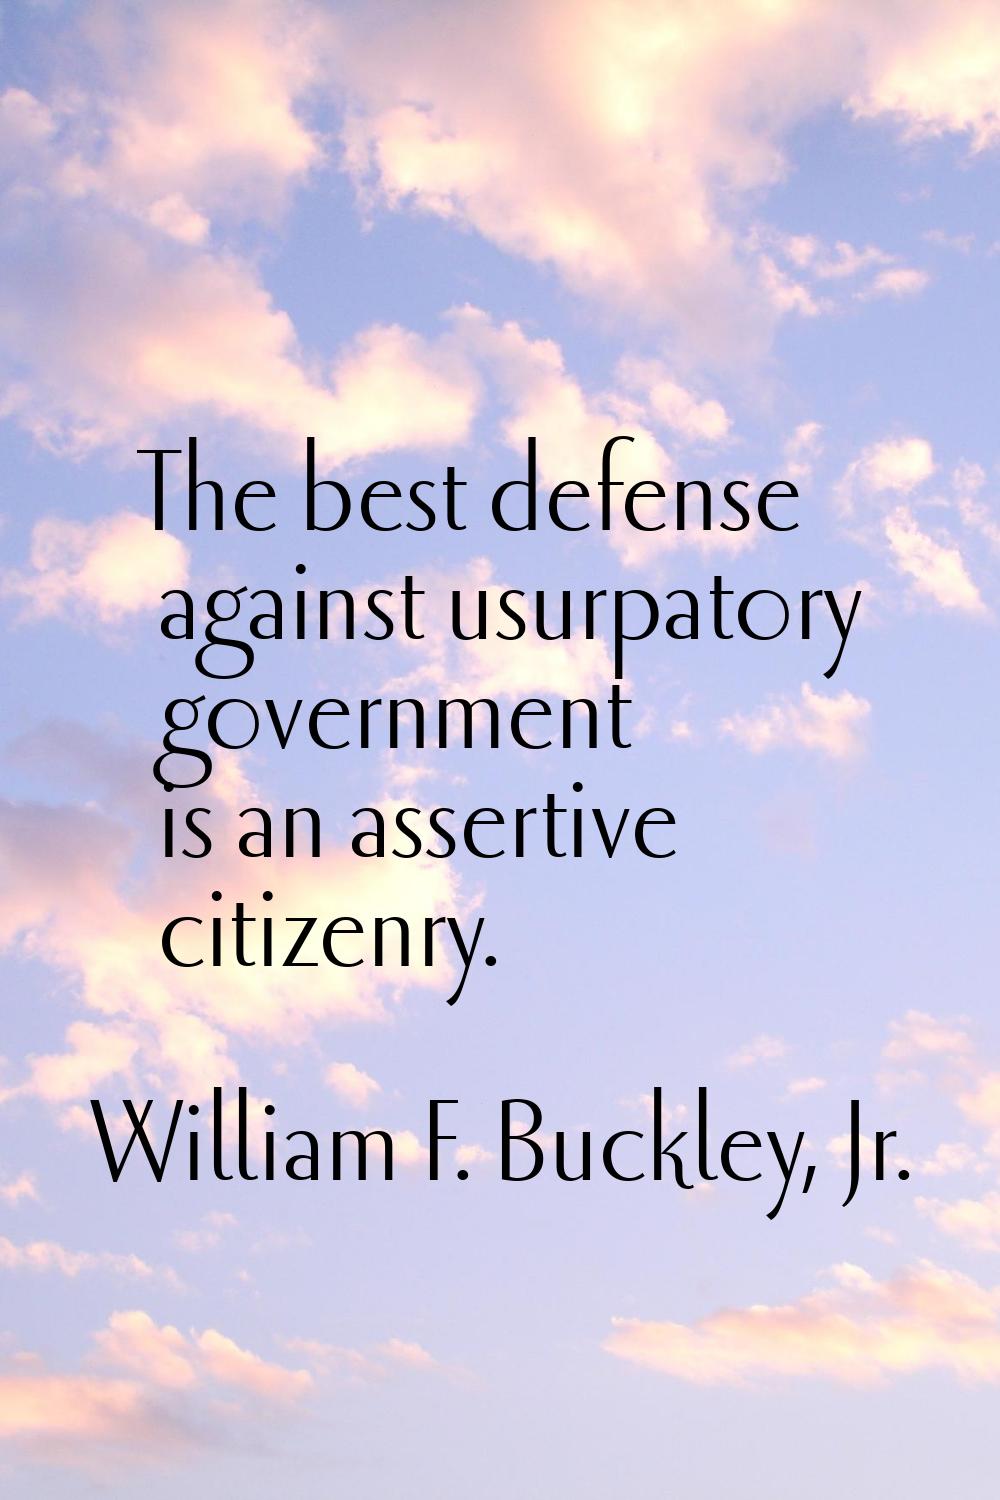 The best defense against usurpatory government is an assertive citizenry.